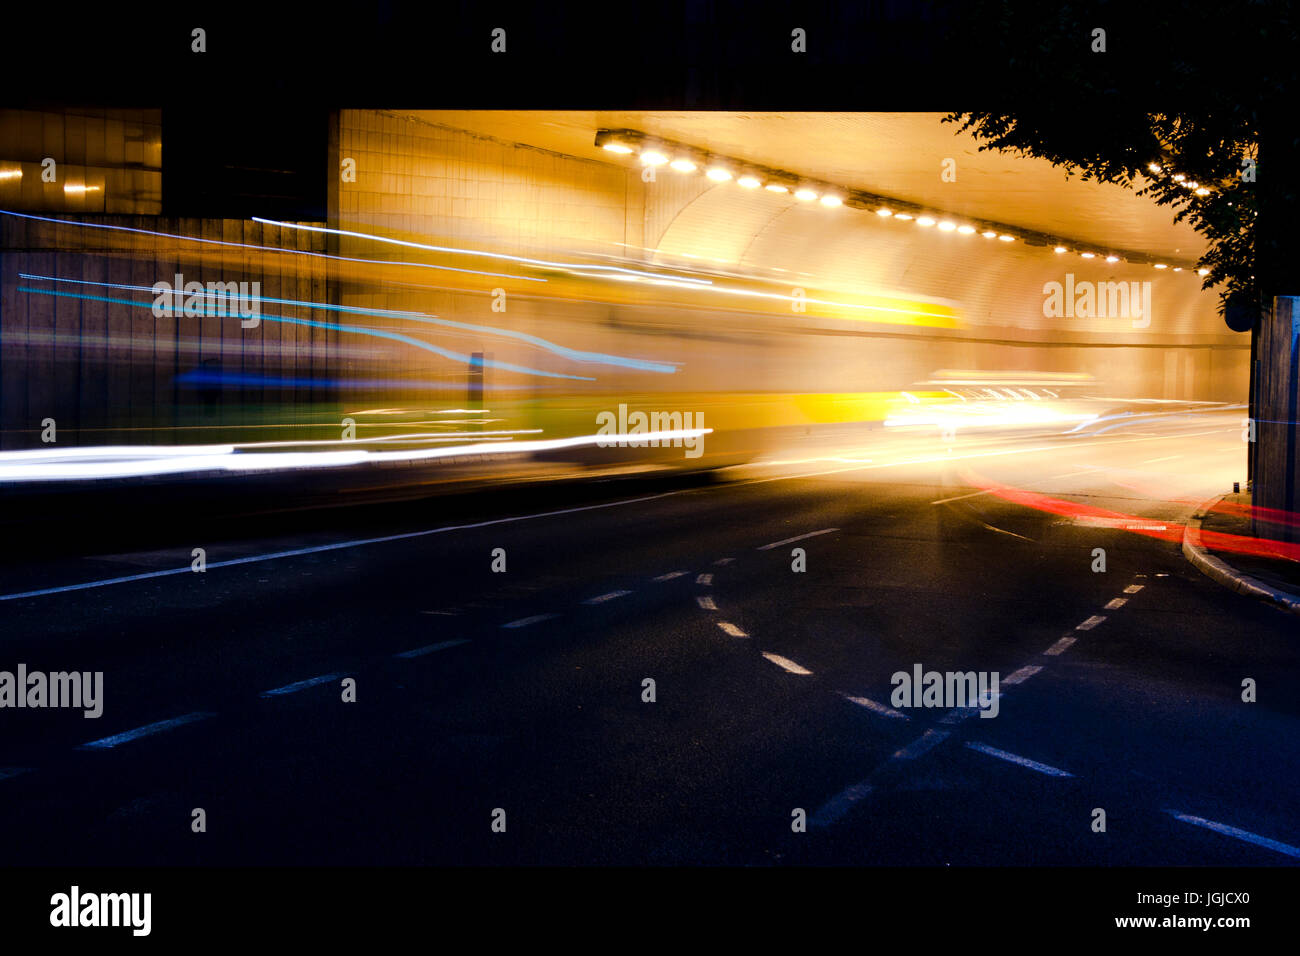 Night traffic on city streets. Vehicles getting in and out of the tunnel Stock Photo